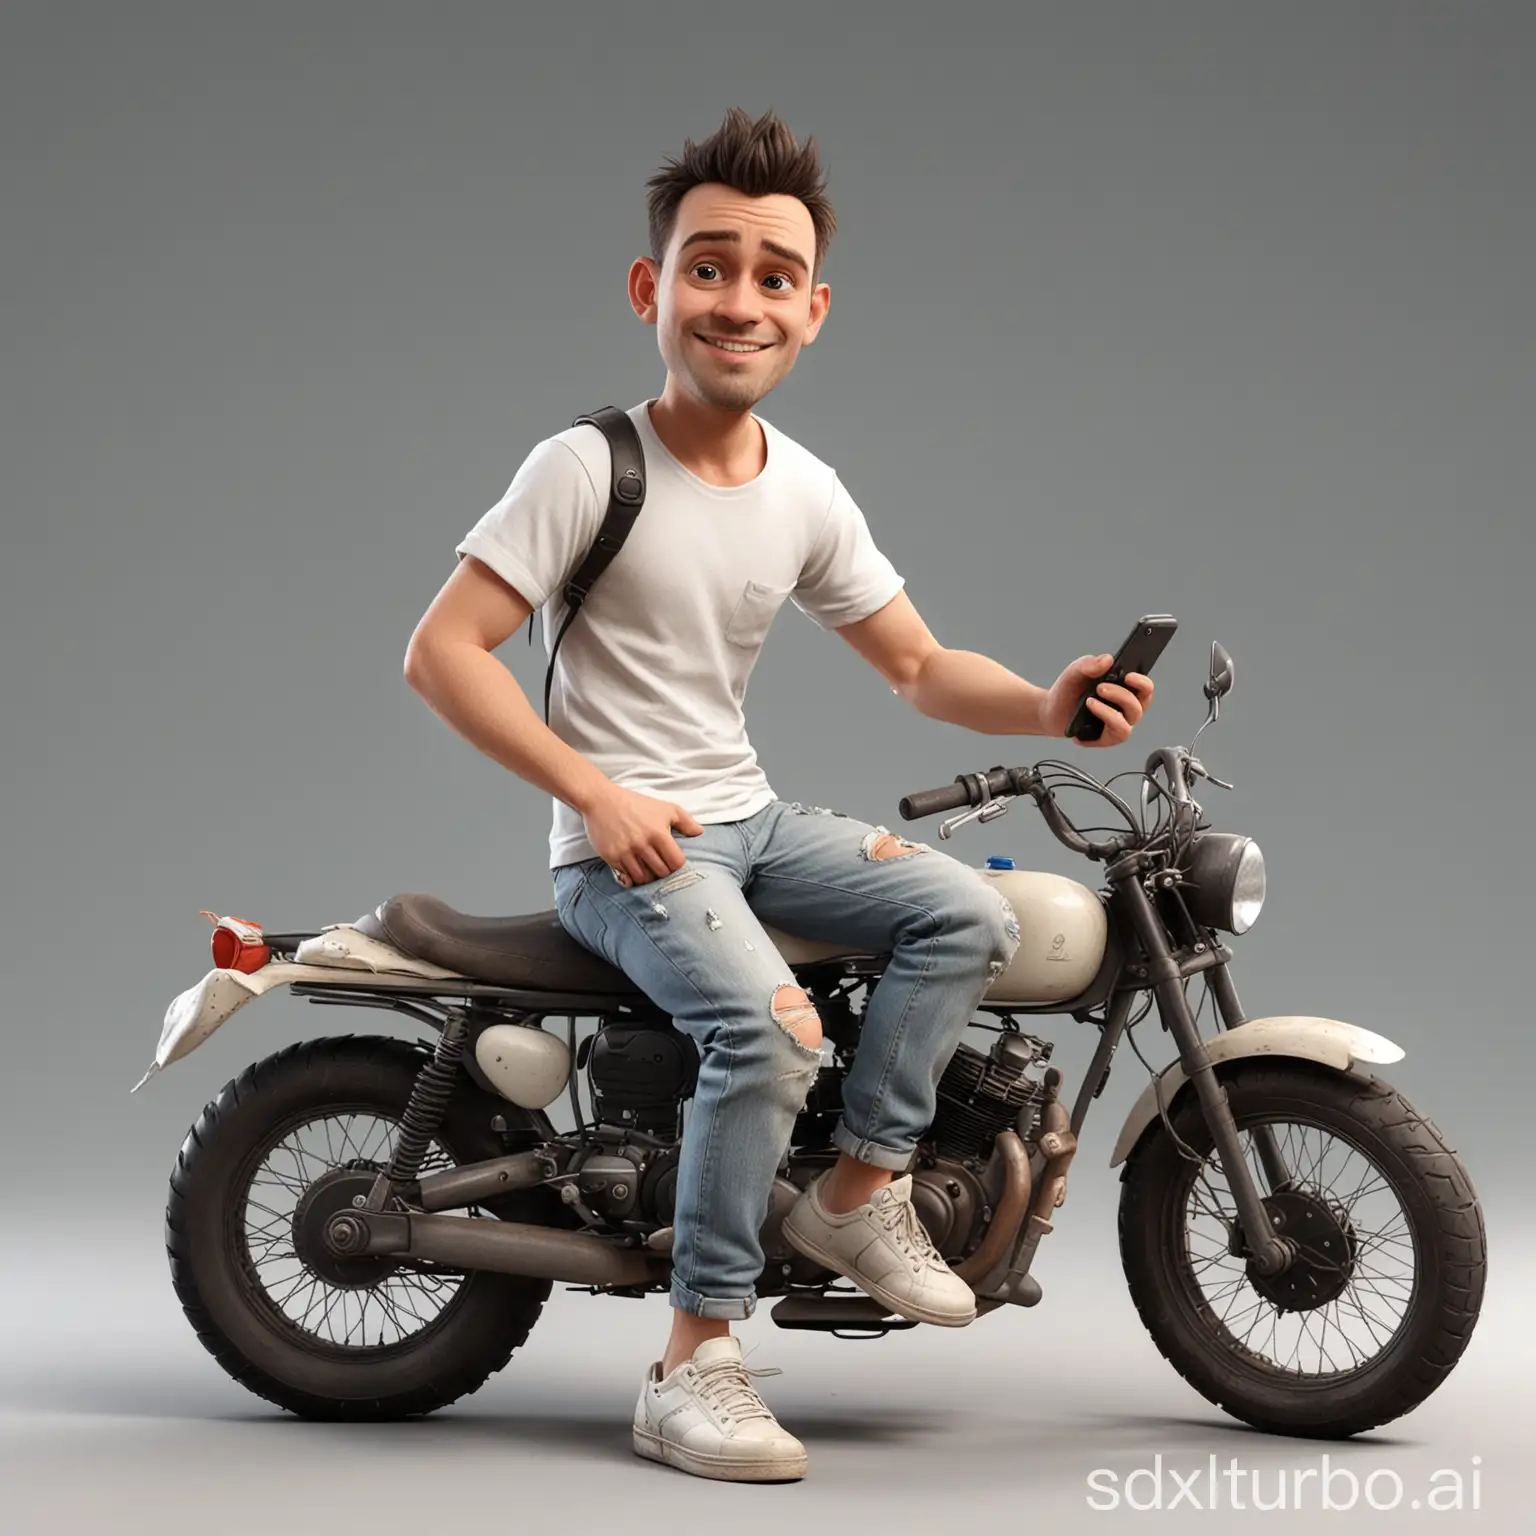 create a realistic 3D caricature Disney Pixar style full body with a big head. 35 year old man, was sitting on a motorbike while playing on his cellphone. Wearing a white t-shirt covered with a cream colored shirt. wearing worn and torn gray jeans. wearing white sneakers with black socks. Sit with your legs apart, right hand plucking the strings, left hand pressing the scales. The background is workshop and contrast. improves the overall composition of the image. Use soft photographic lighting, dramatic overhead lighting, very high image quality, clear character details, UHD, 16k